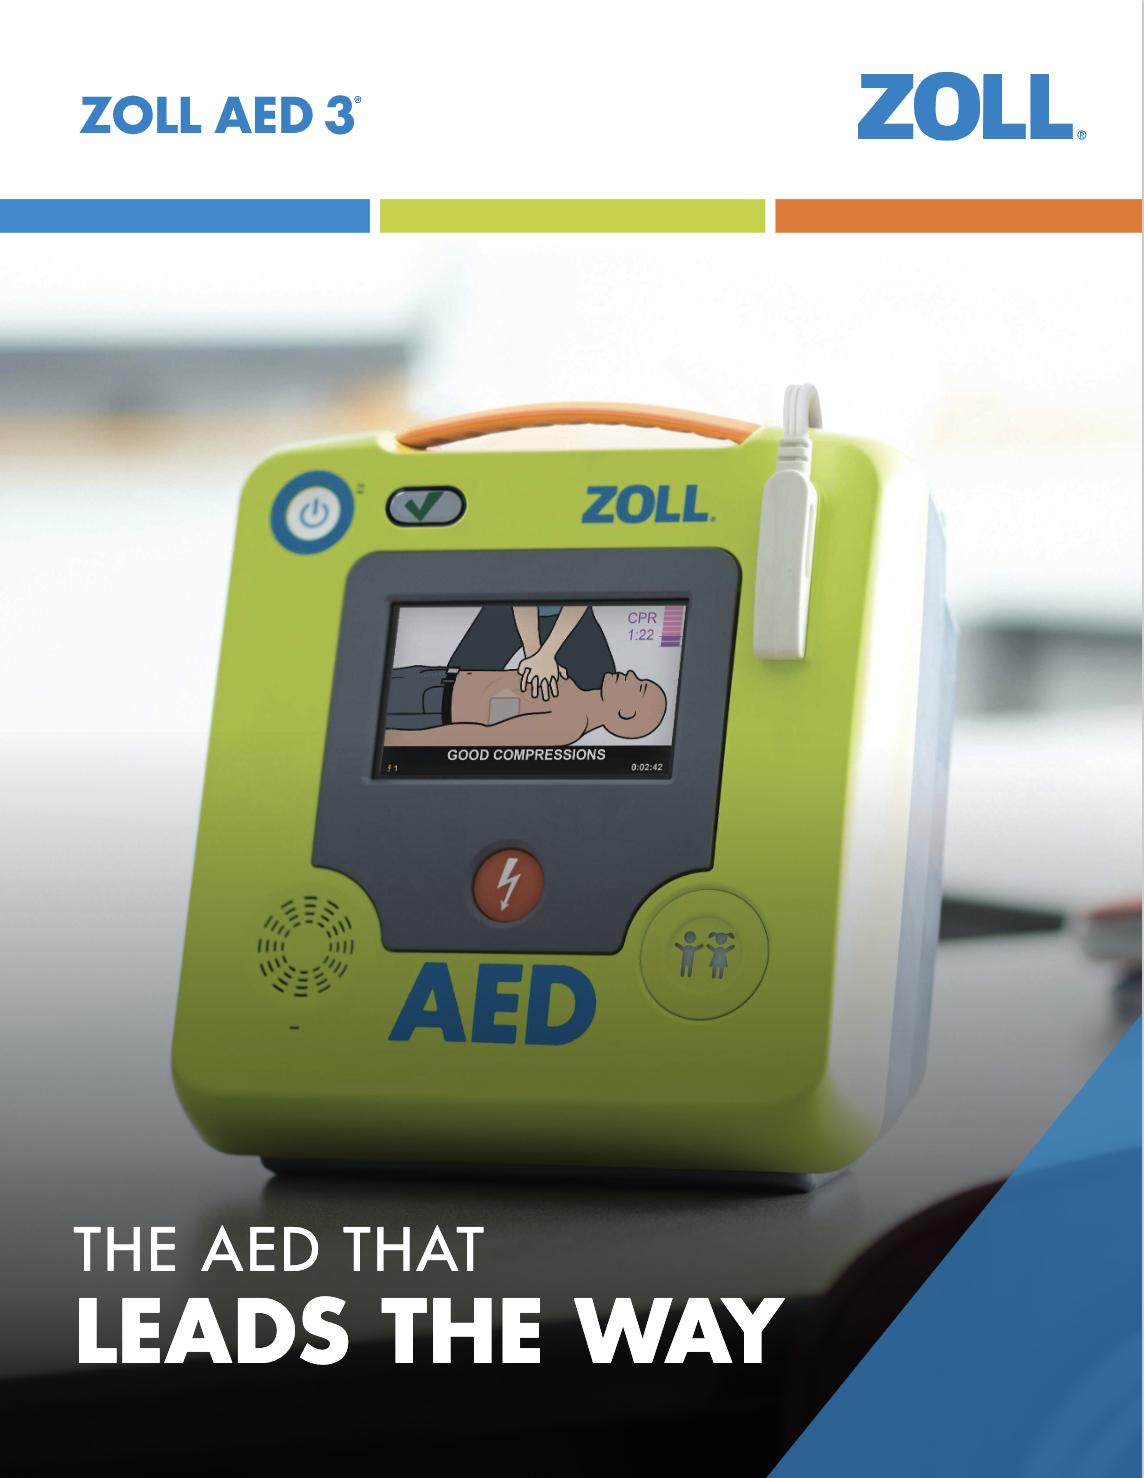 ZOLL AED 3 brochure